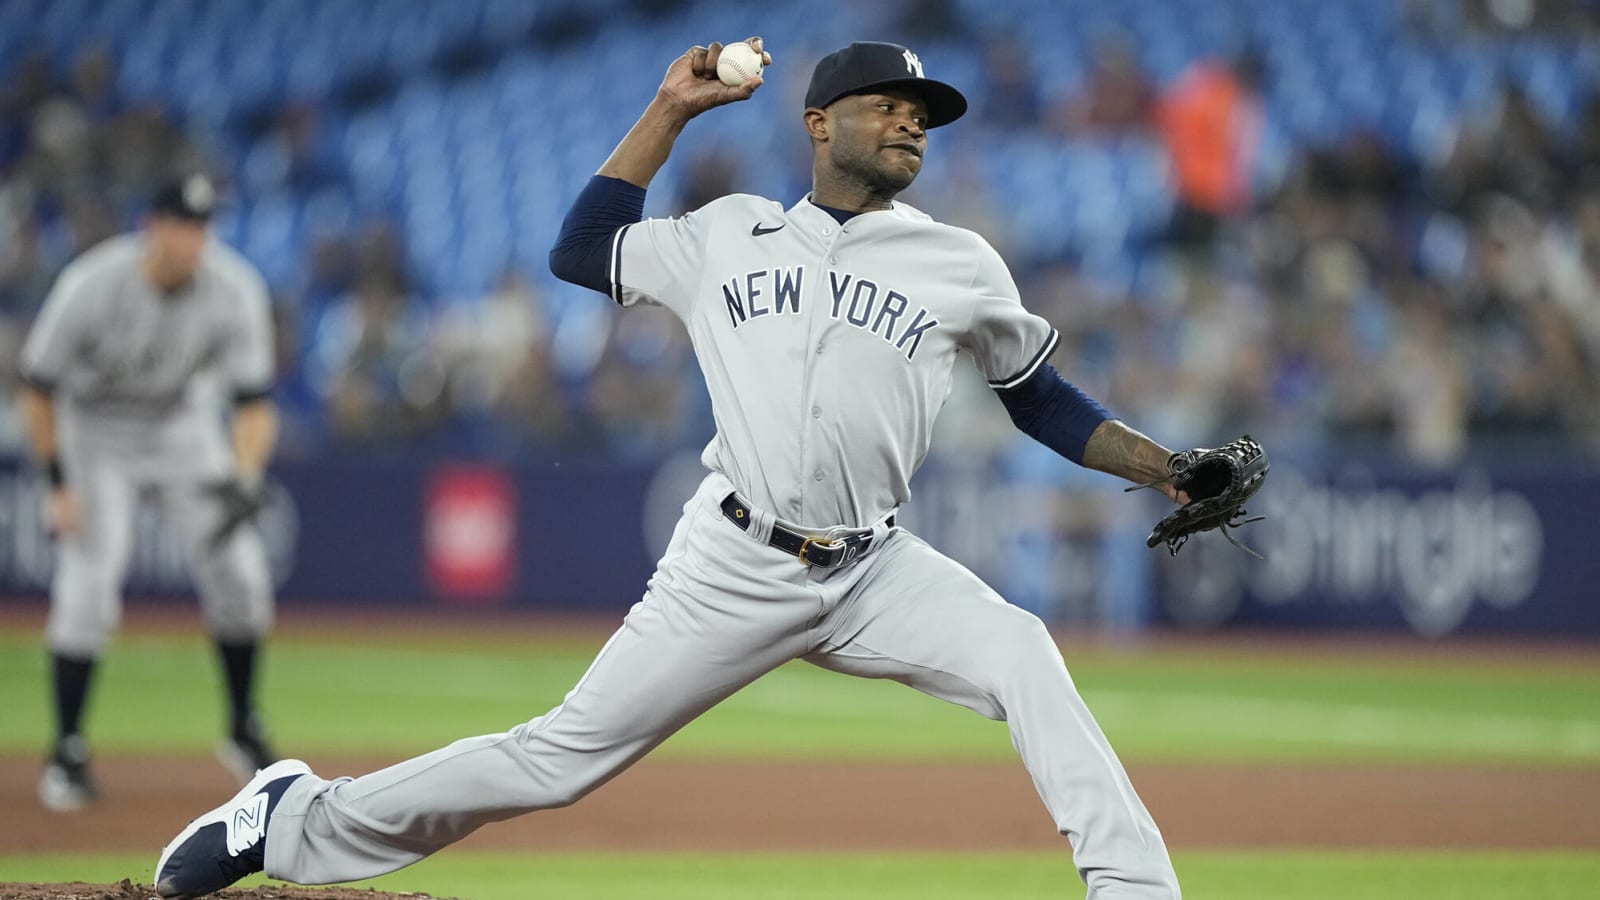 Yankees hurler to use less rosin after suspension